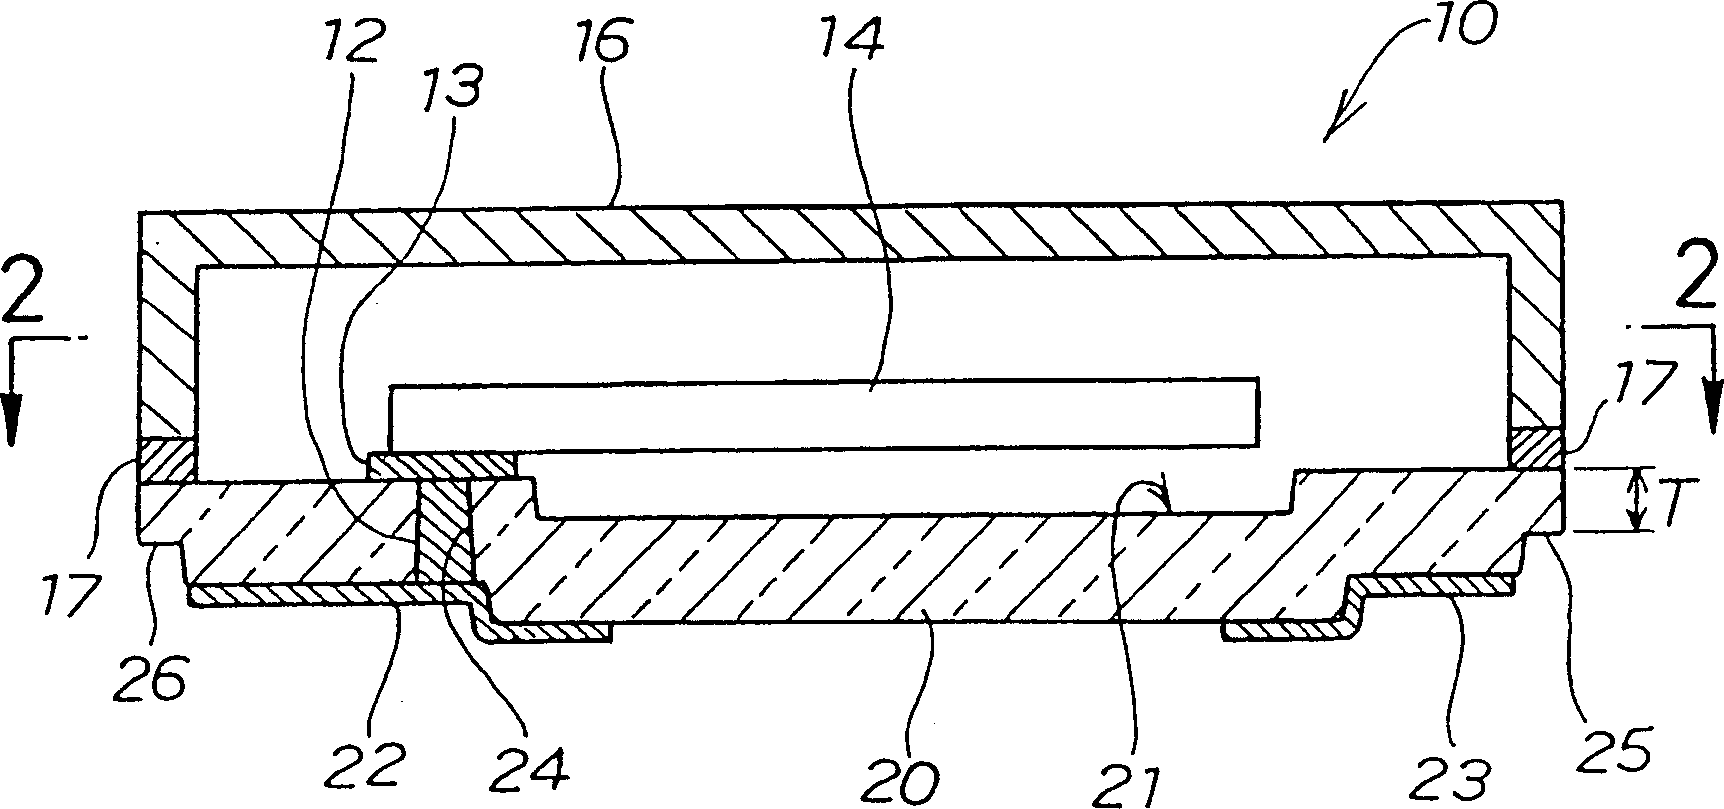 Transistor vibrator assembly and its mfg. method, and method for mfg. various connected glass plate used for electronic element assembly